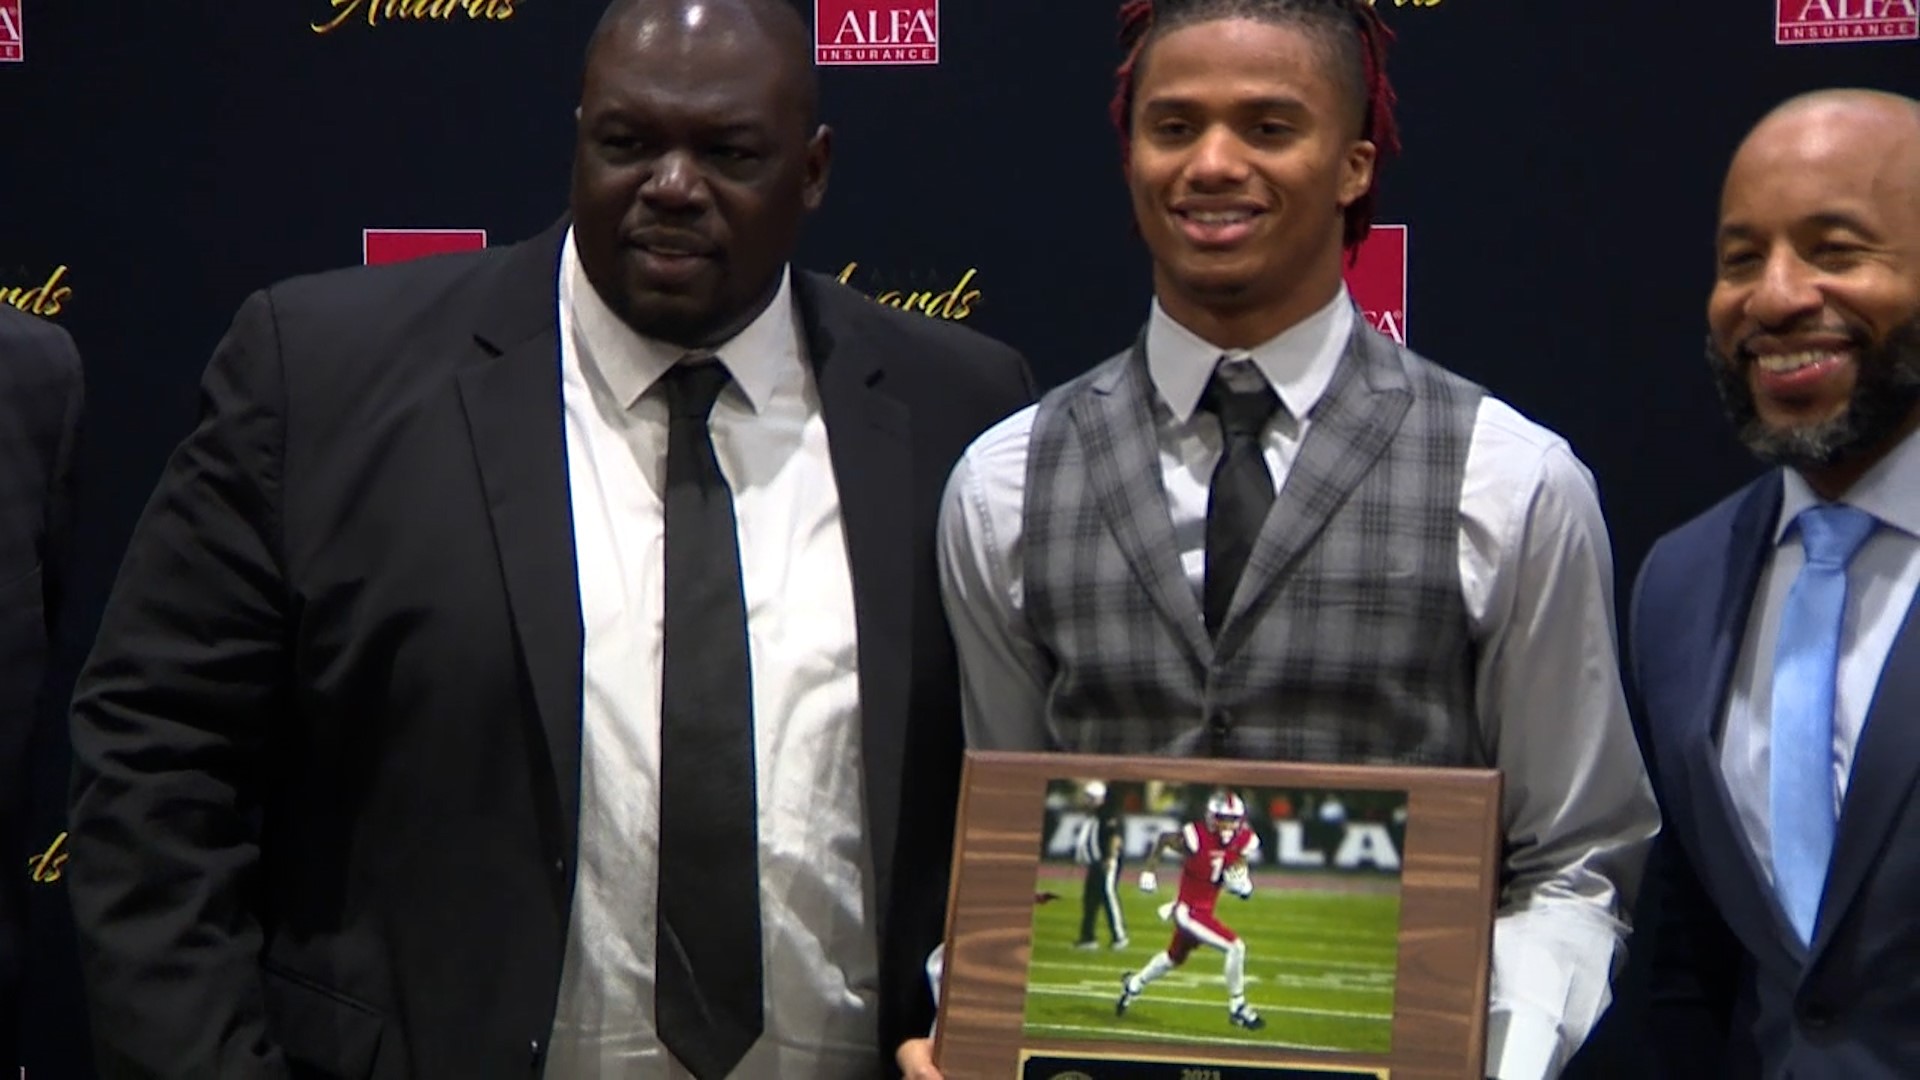 Saraland's Ryan Wiliams was announced Tuesday as the Alabama Sportswriters Association’s Mr. Football for the 2023 season at the Mr. Football Banquet